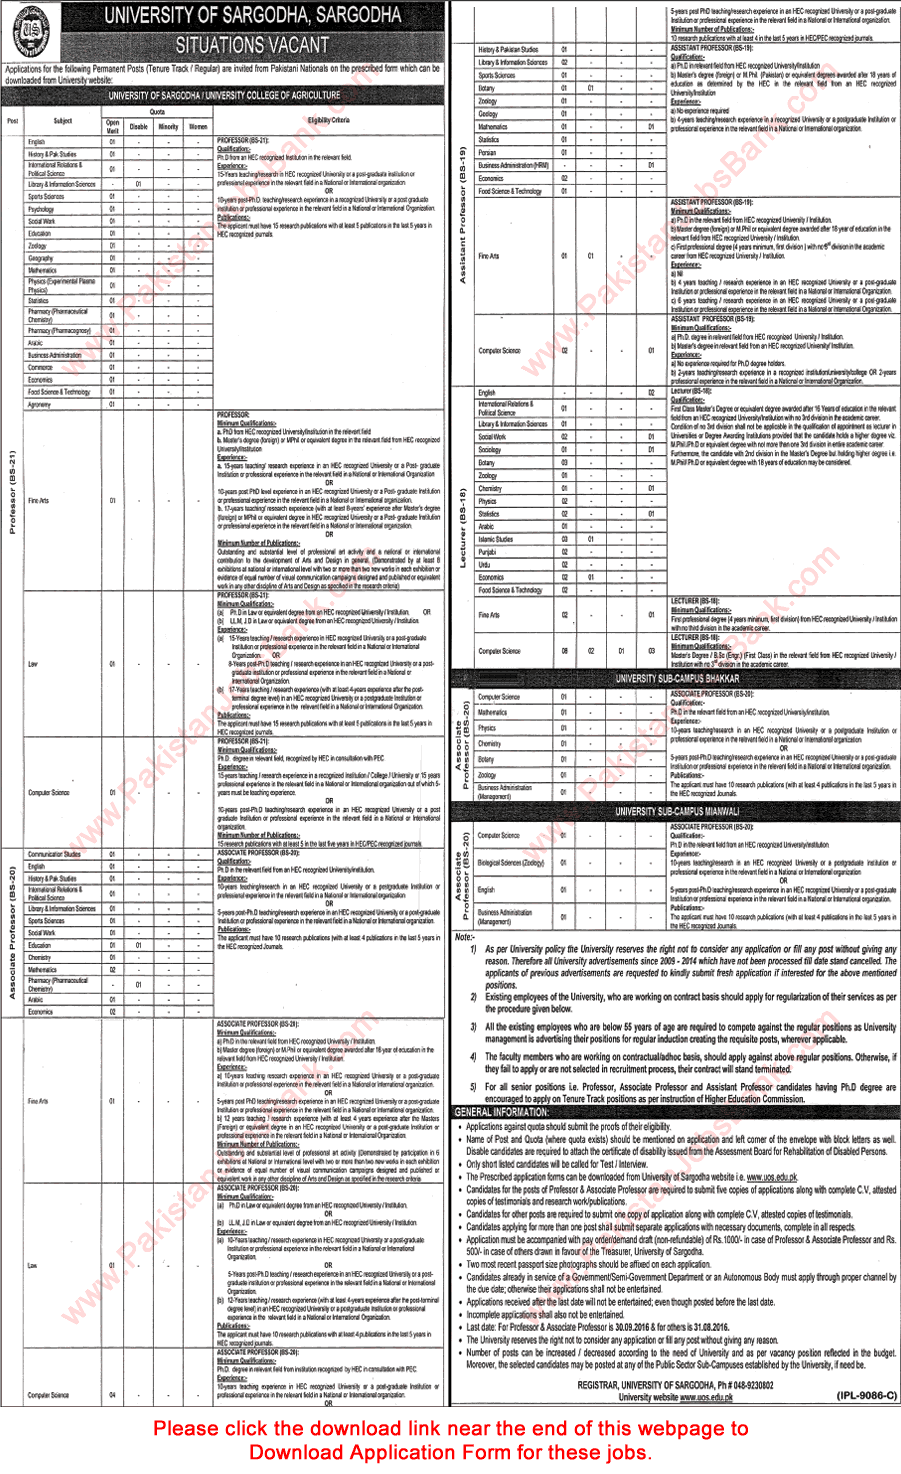 University of Sargodha Jobs July 2016 August UOS Application Form Teaching Faculty Latest